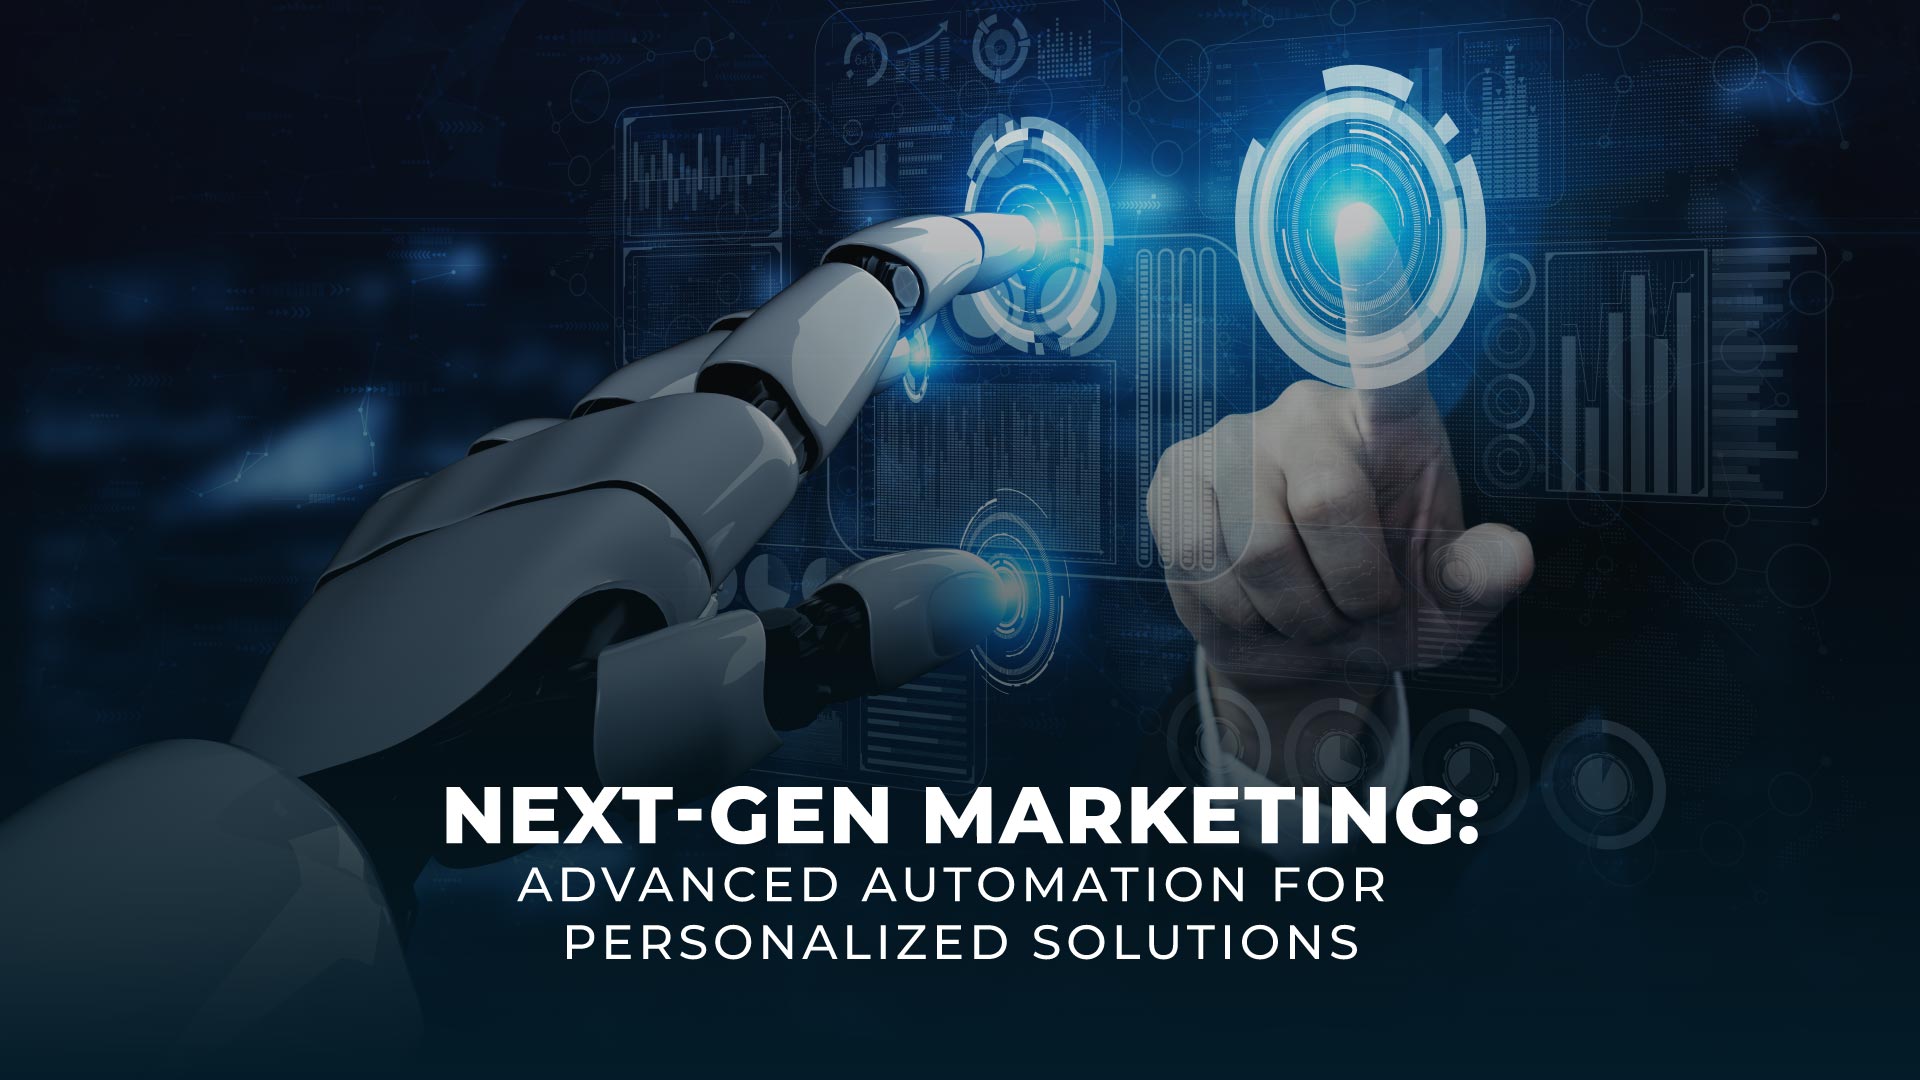 Next-Gen Marketing: Advanced Automation for Personalized Solutions